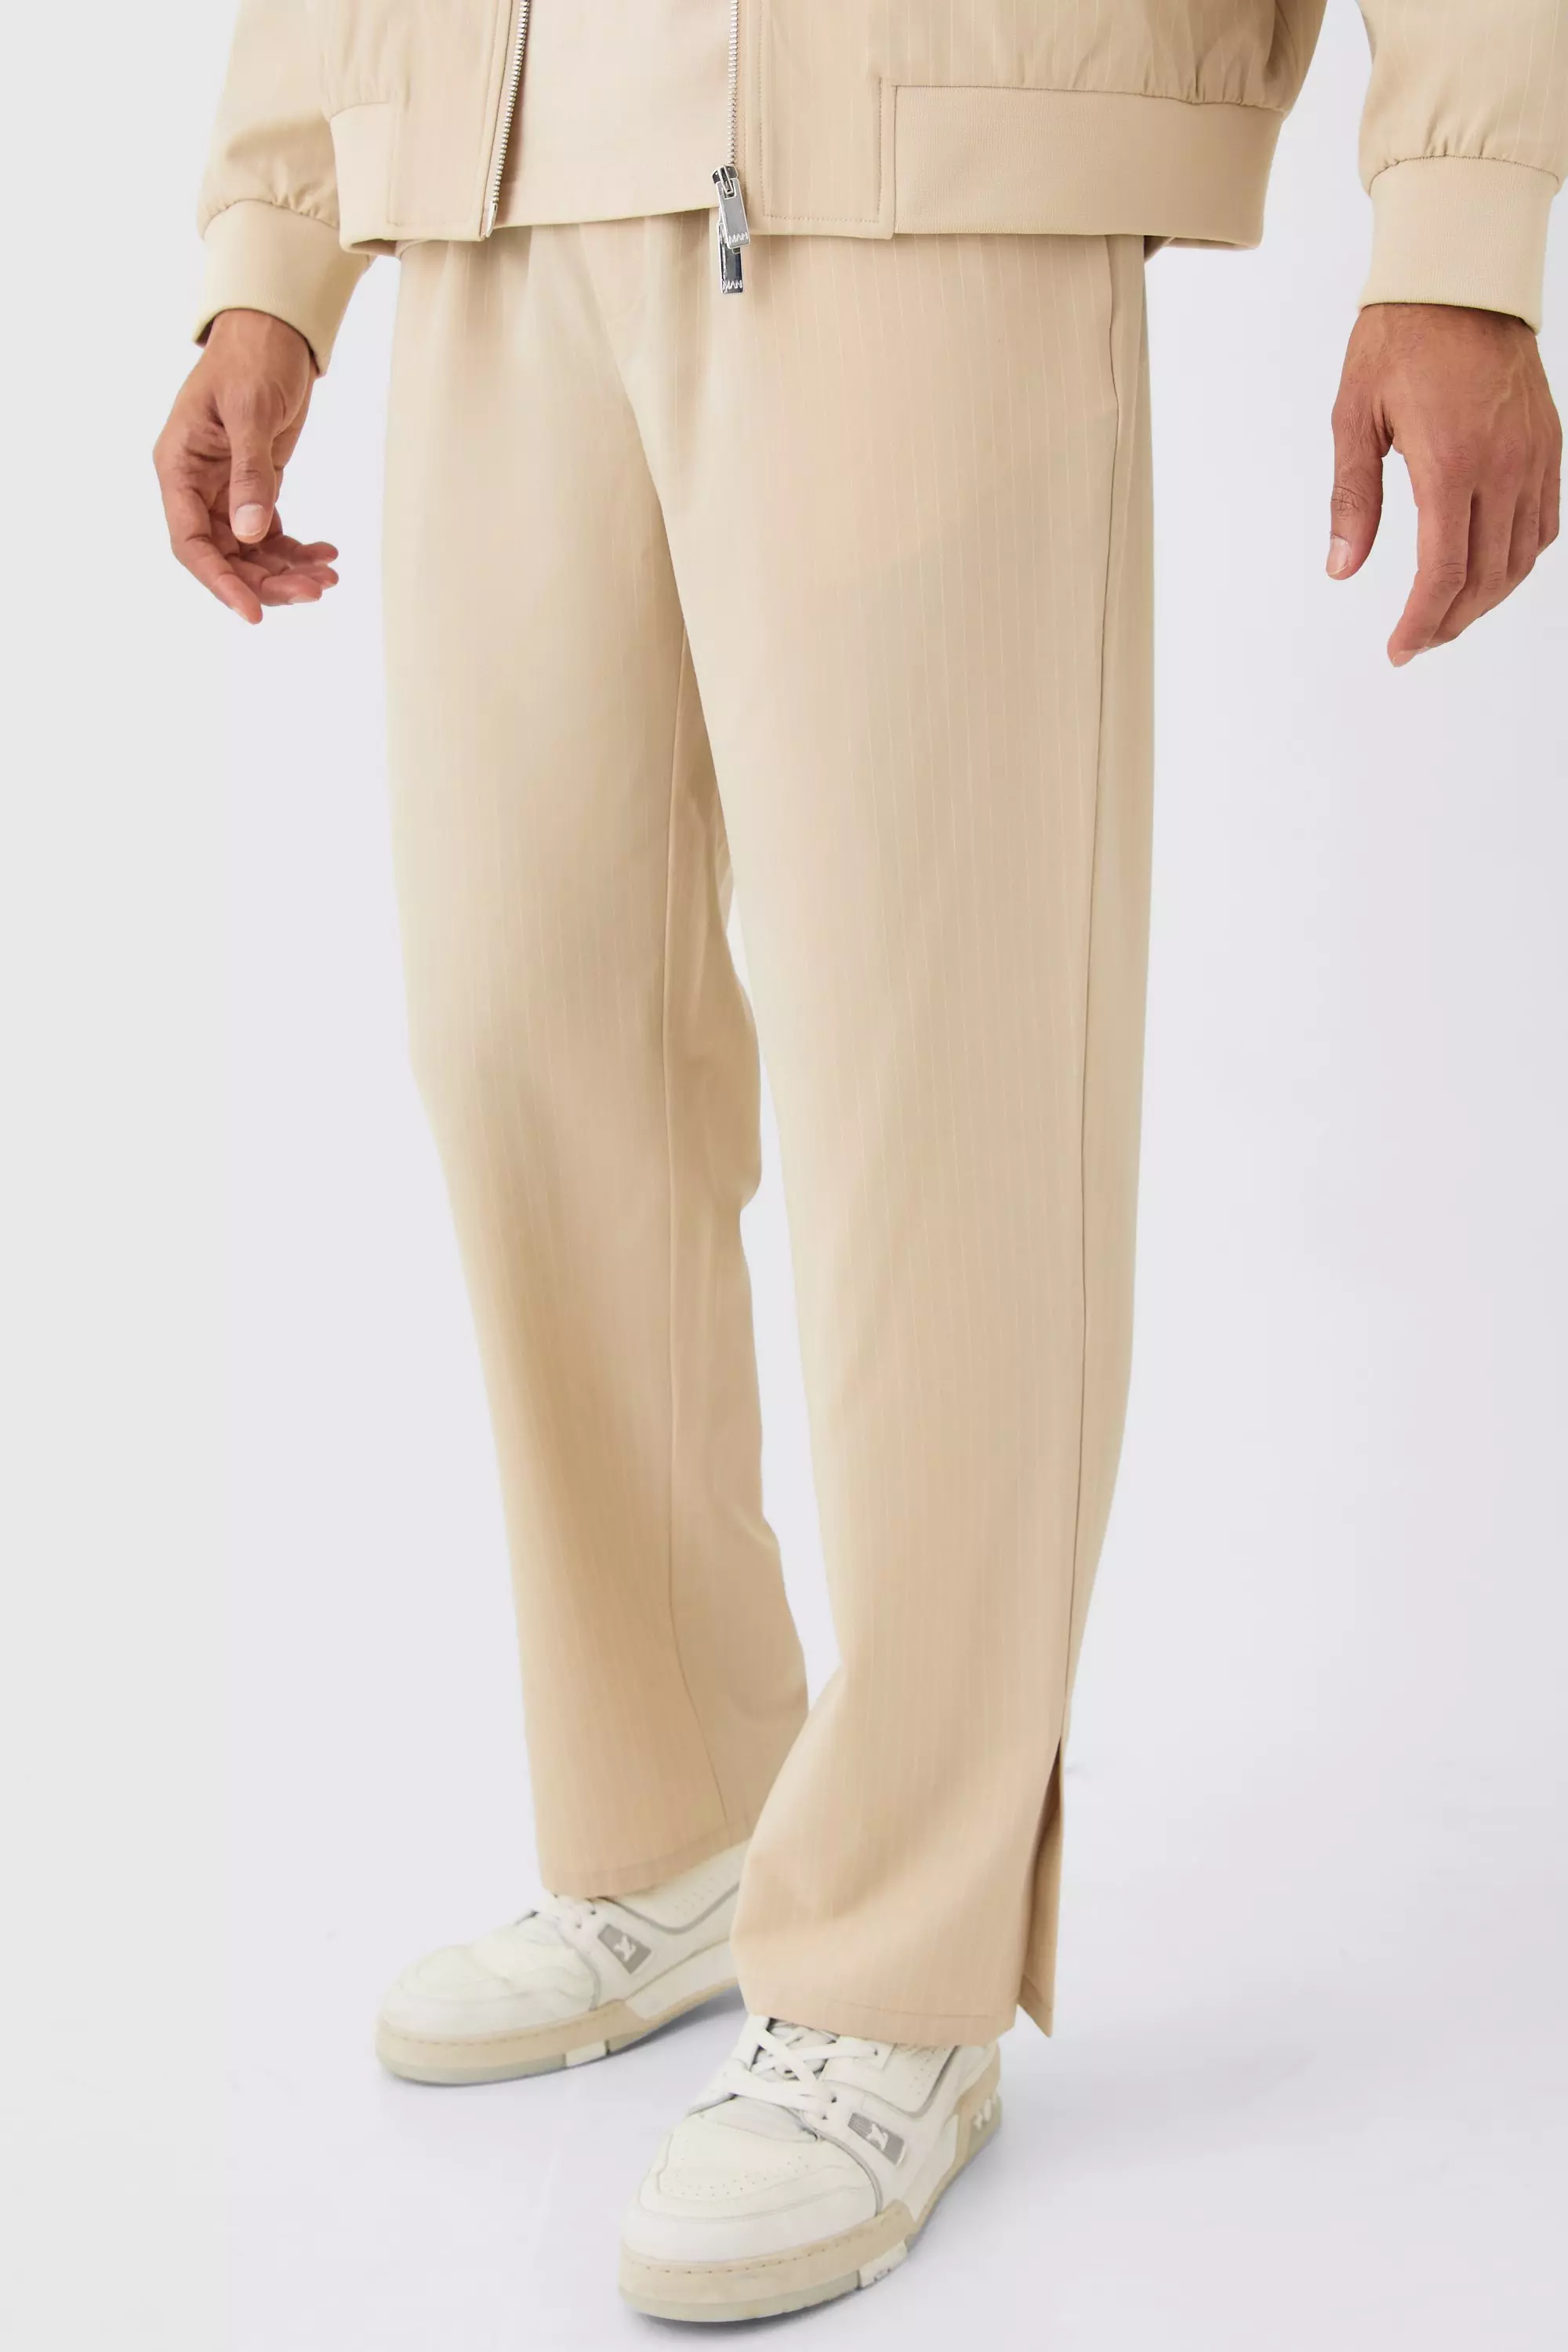 IEFB Mens Split Bottoms Casual Spring Beige Trousers Mens With Korean Back  And Elastic Waist 9Y5961 210524 From Lu02, $29.88